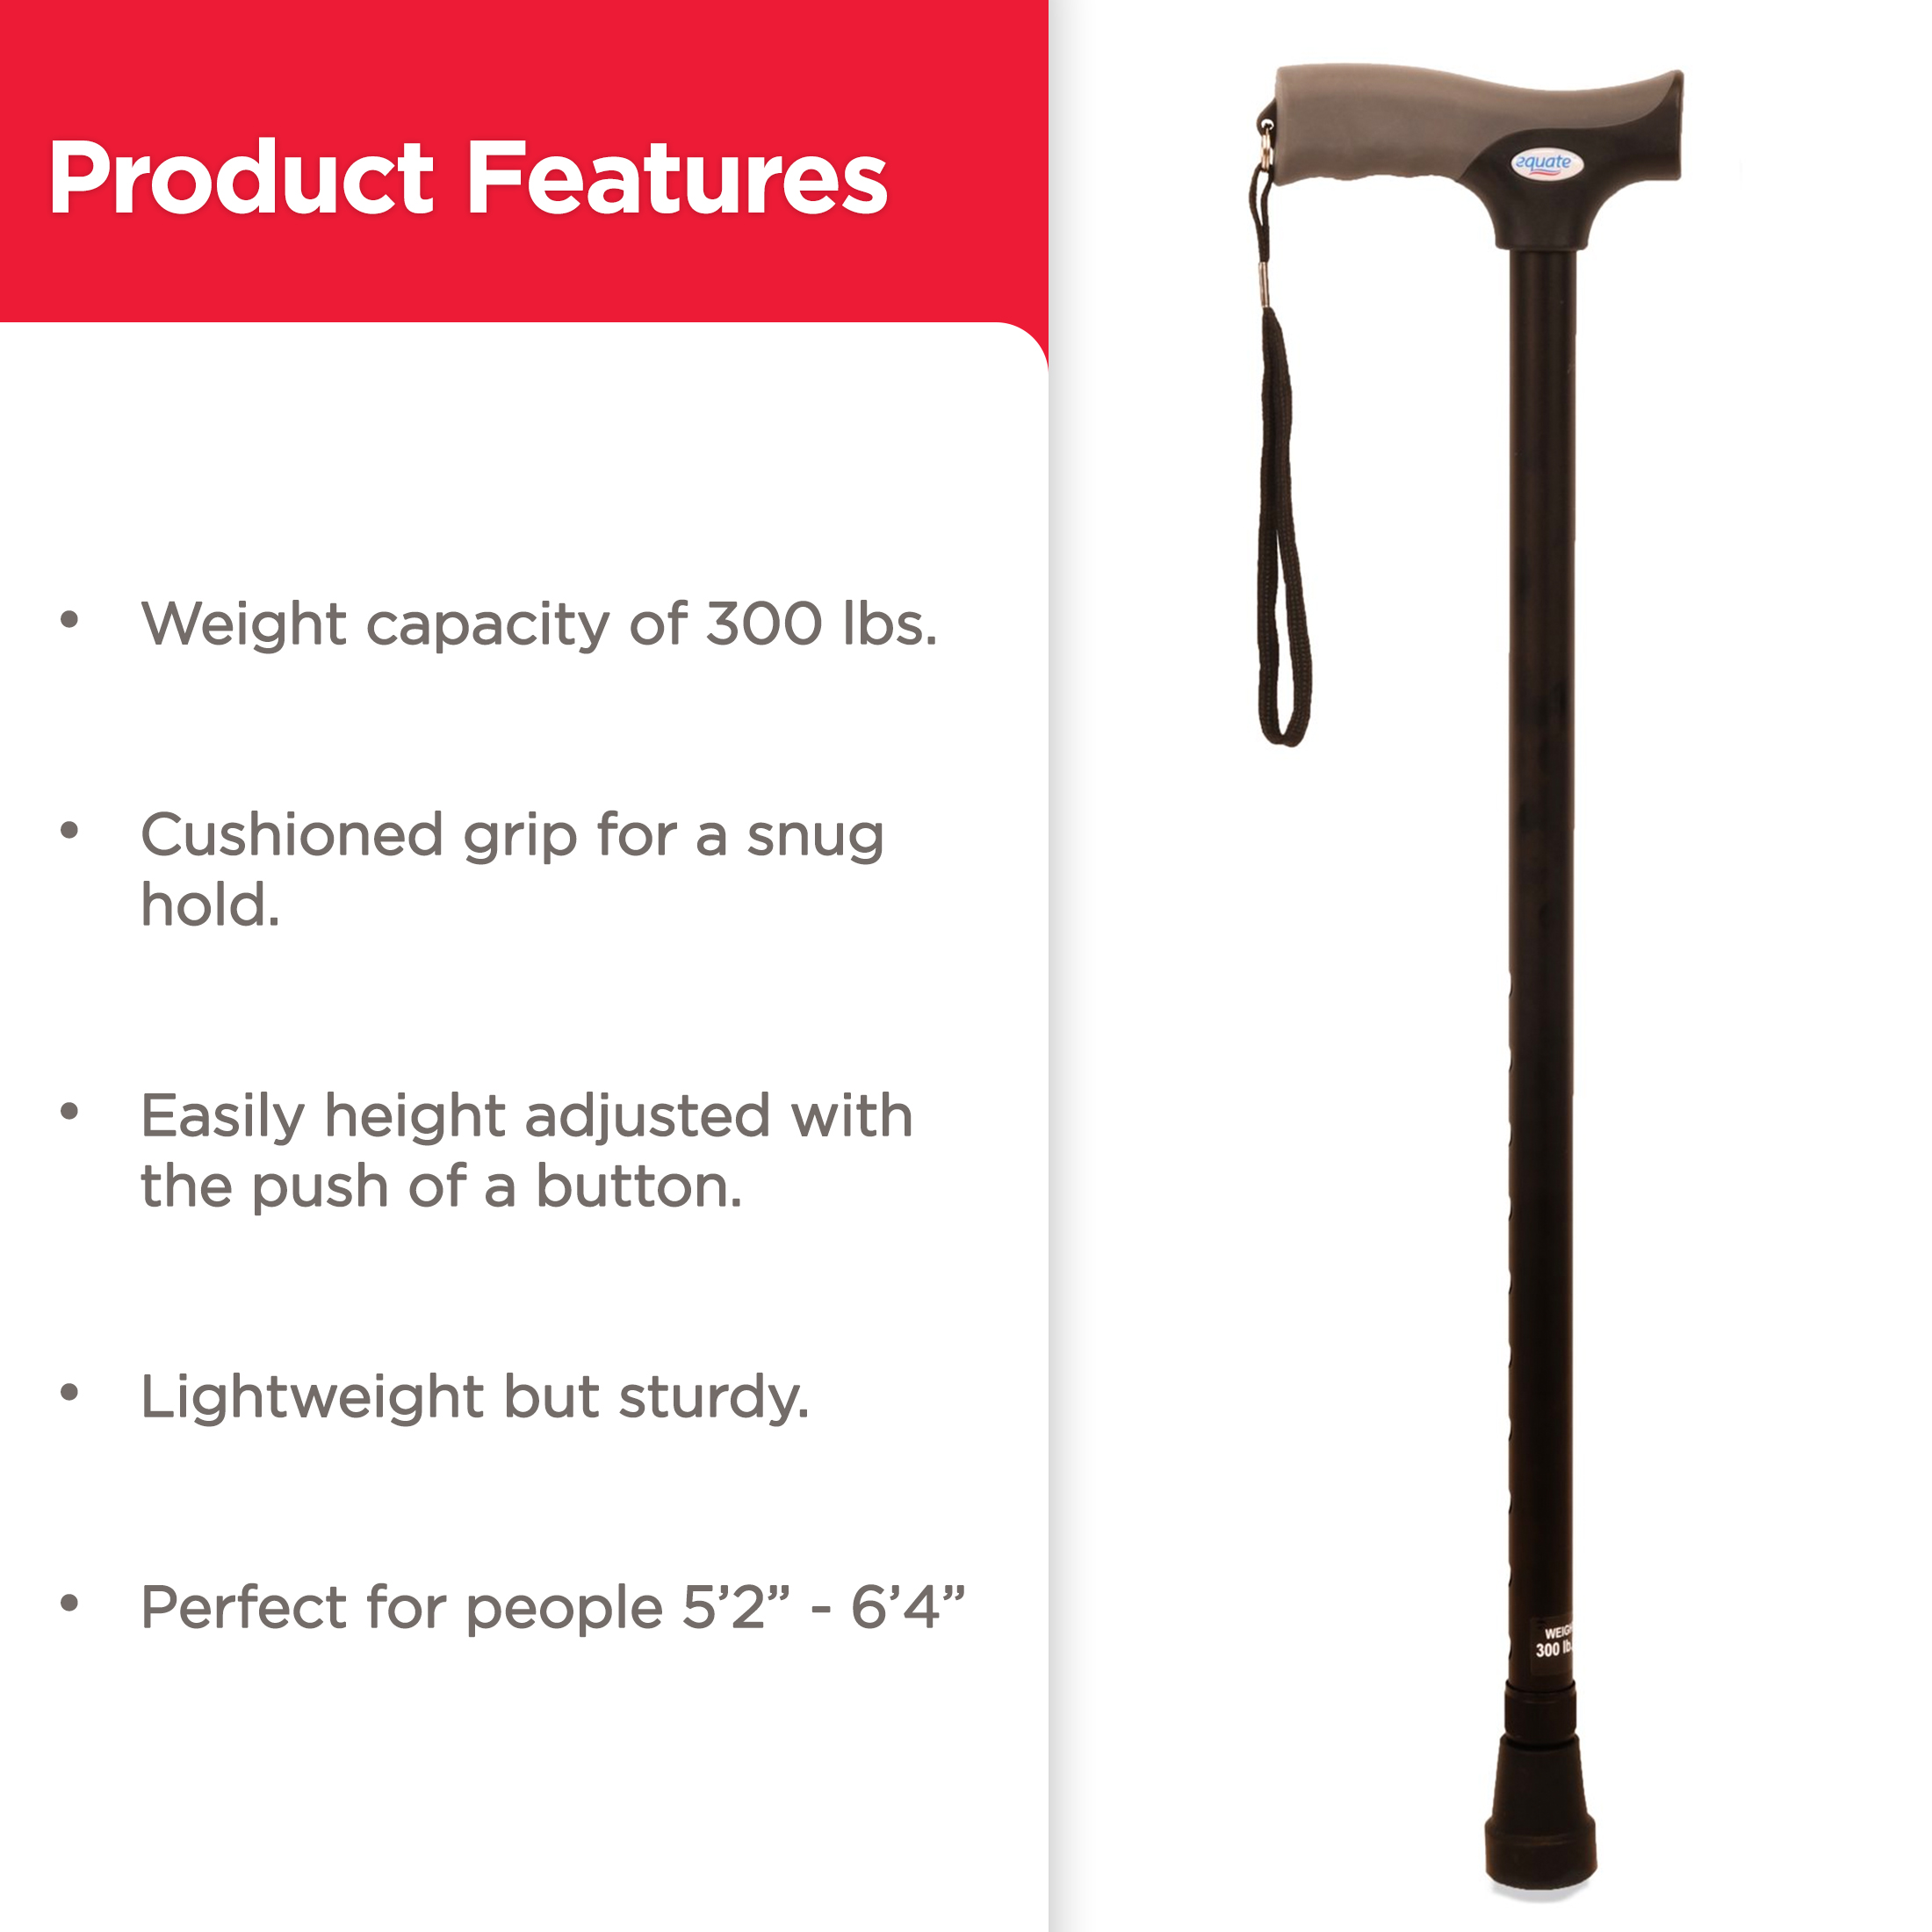 Equate Comfort Grip Walking Cane for All Occasions, Adjustable, Wrist Strap, Black, 300 lb Capacity - image 5 of 8